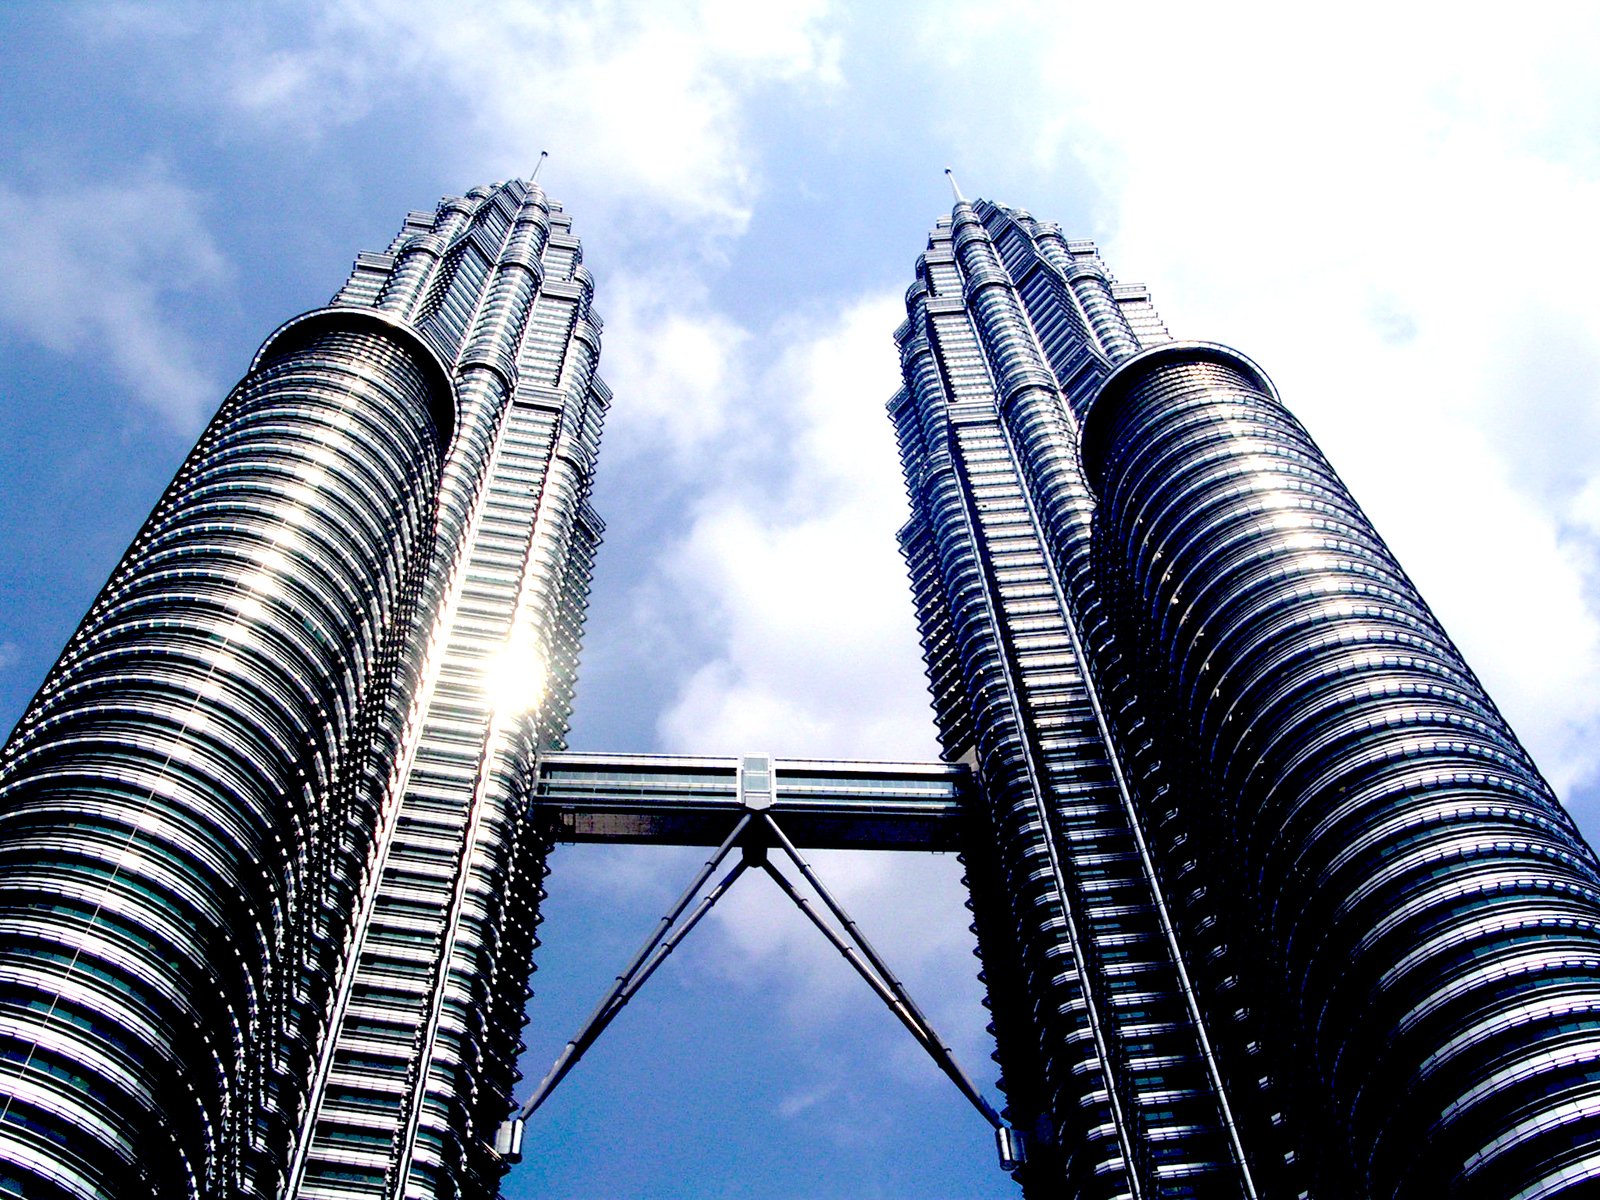 two very tall buildings stand in front of a blue sky